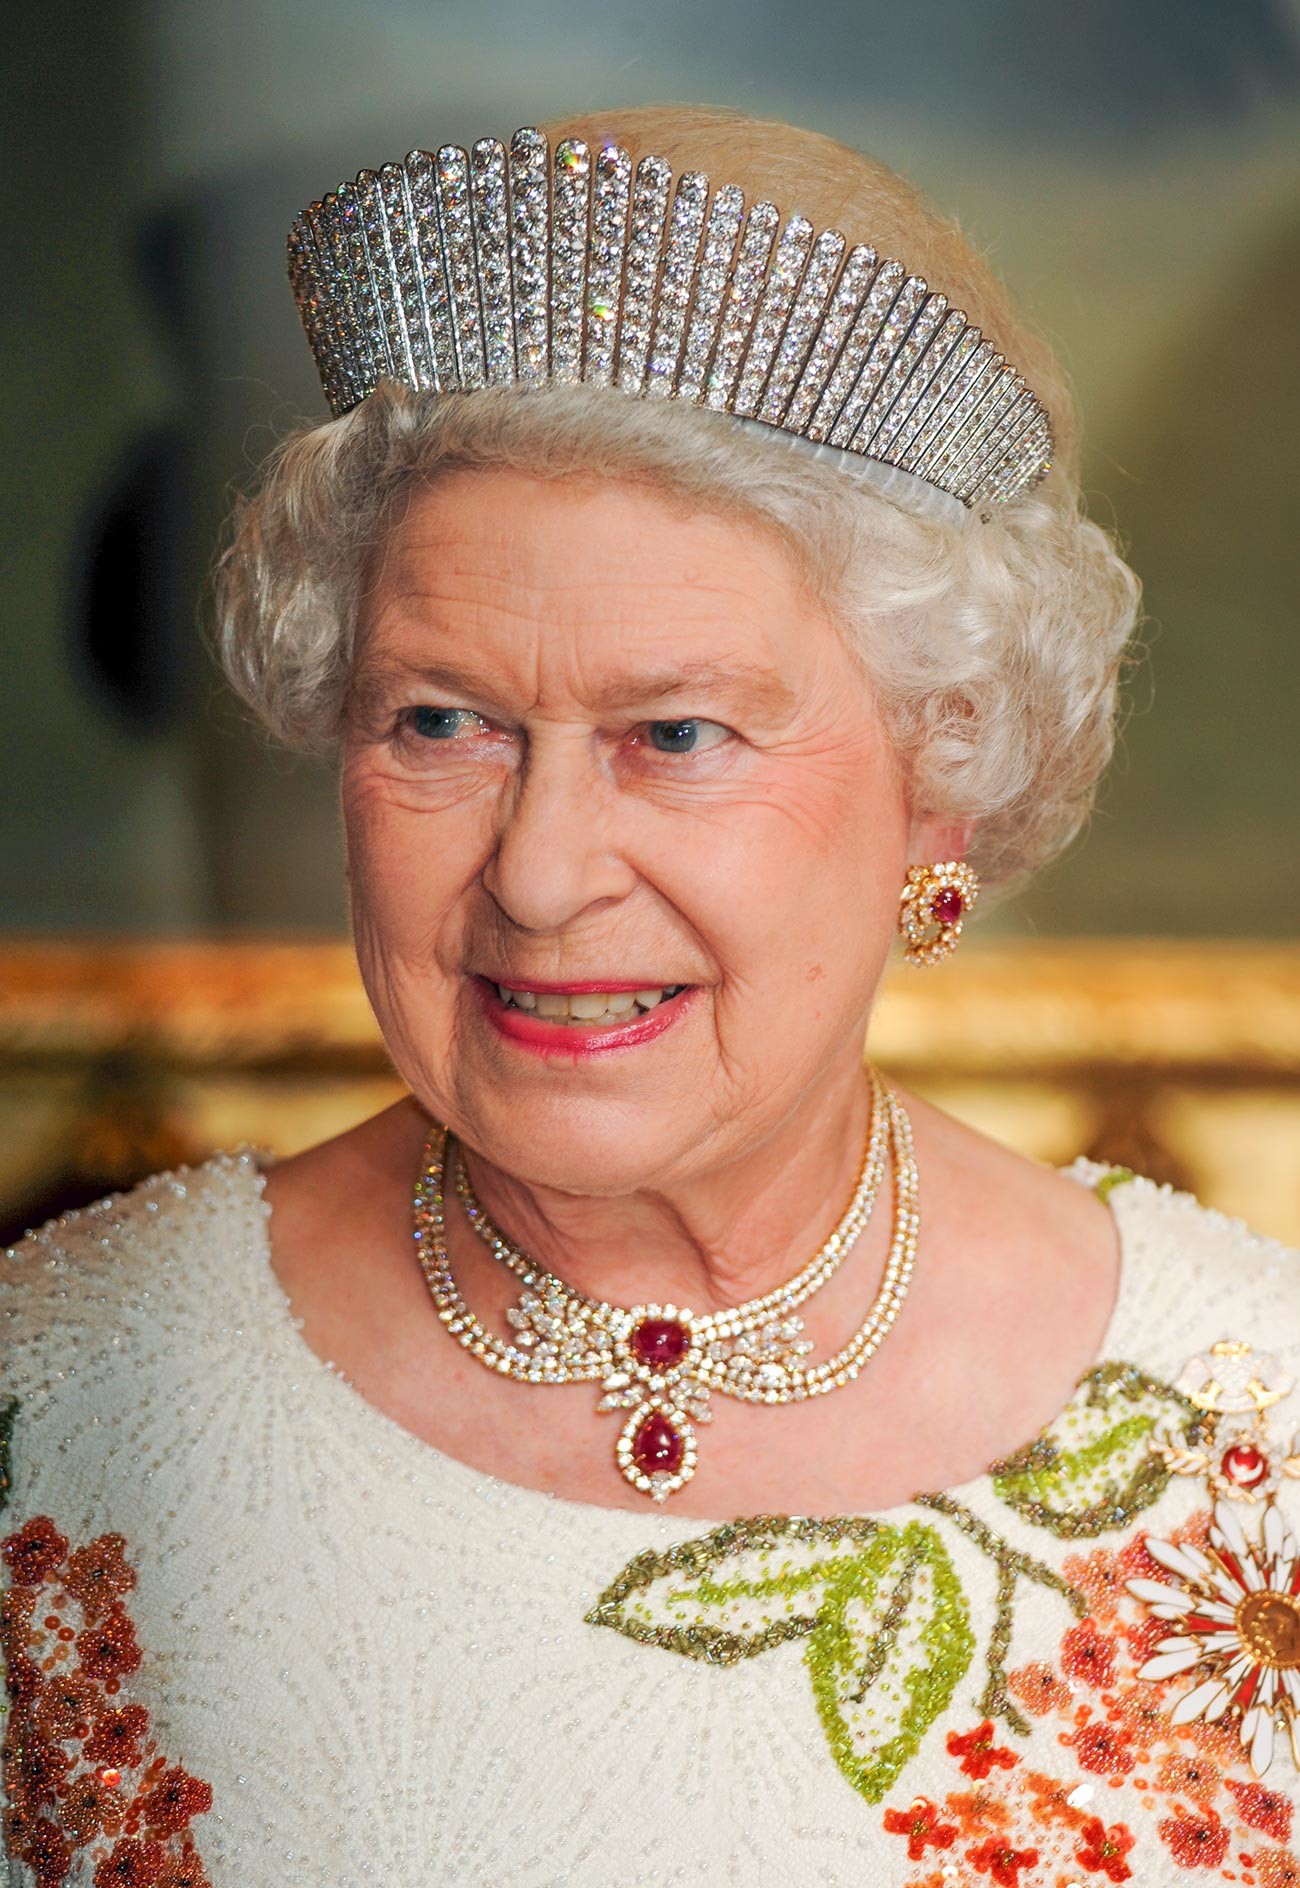 Queen Elizabeth ll attends a State Banquet on the first day of a State Visit to Turkey on May 13, 2008 in Ankara.